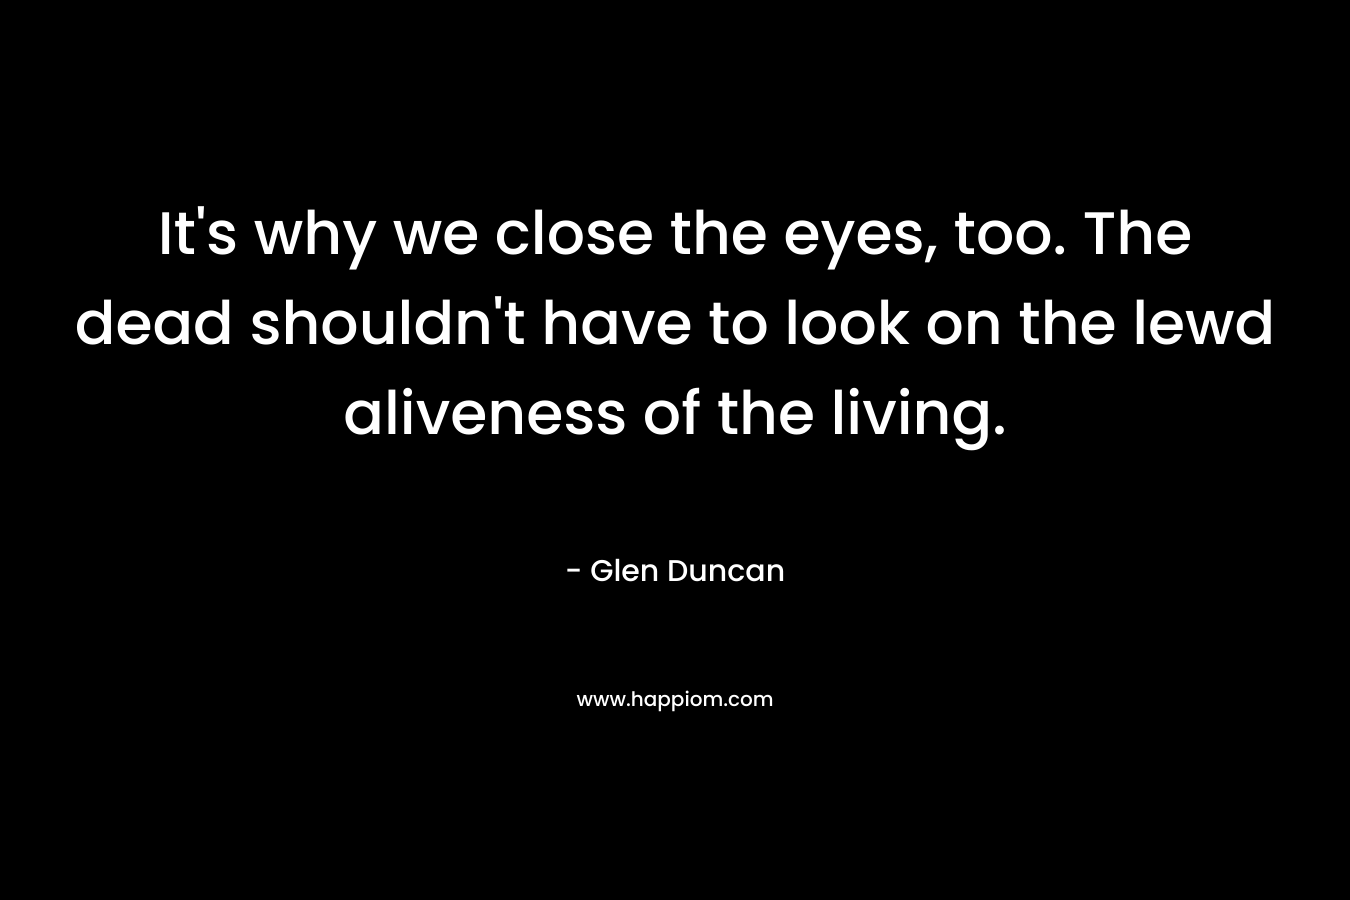 It’s why we close the eyes, too. The dead shouldn’t have to look on the lewd aliveness of the living. – Glen Duncan